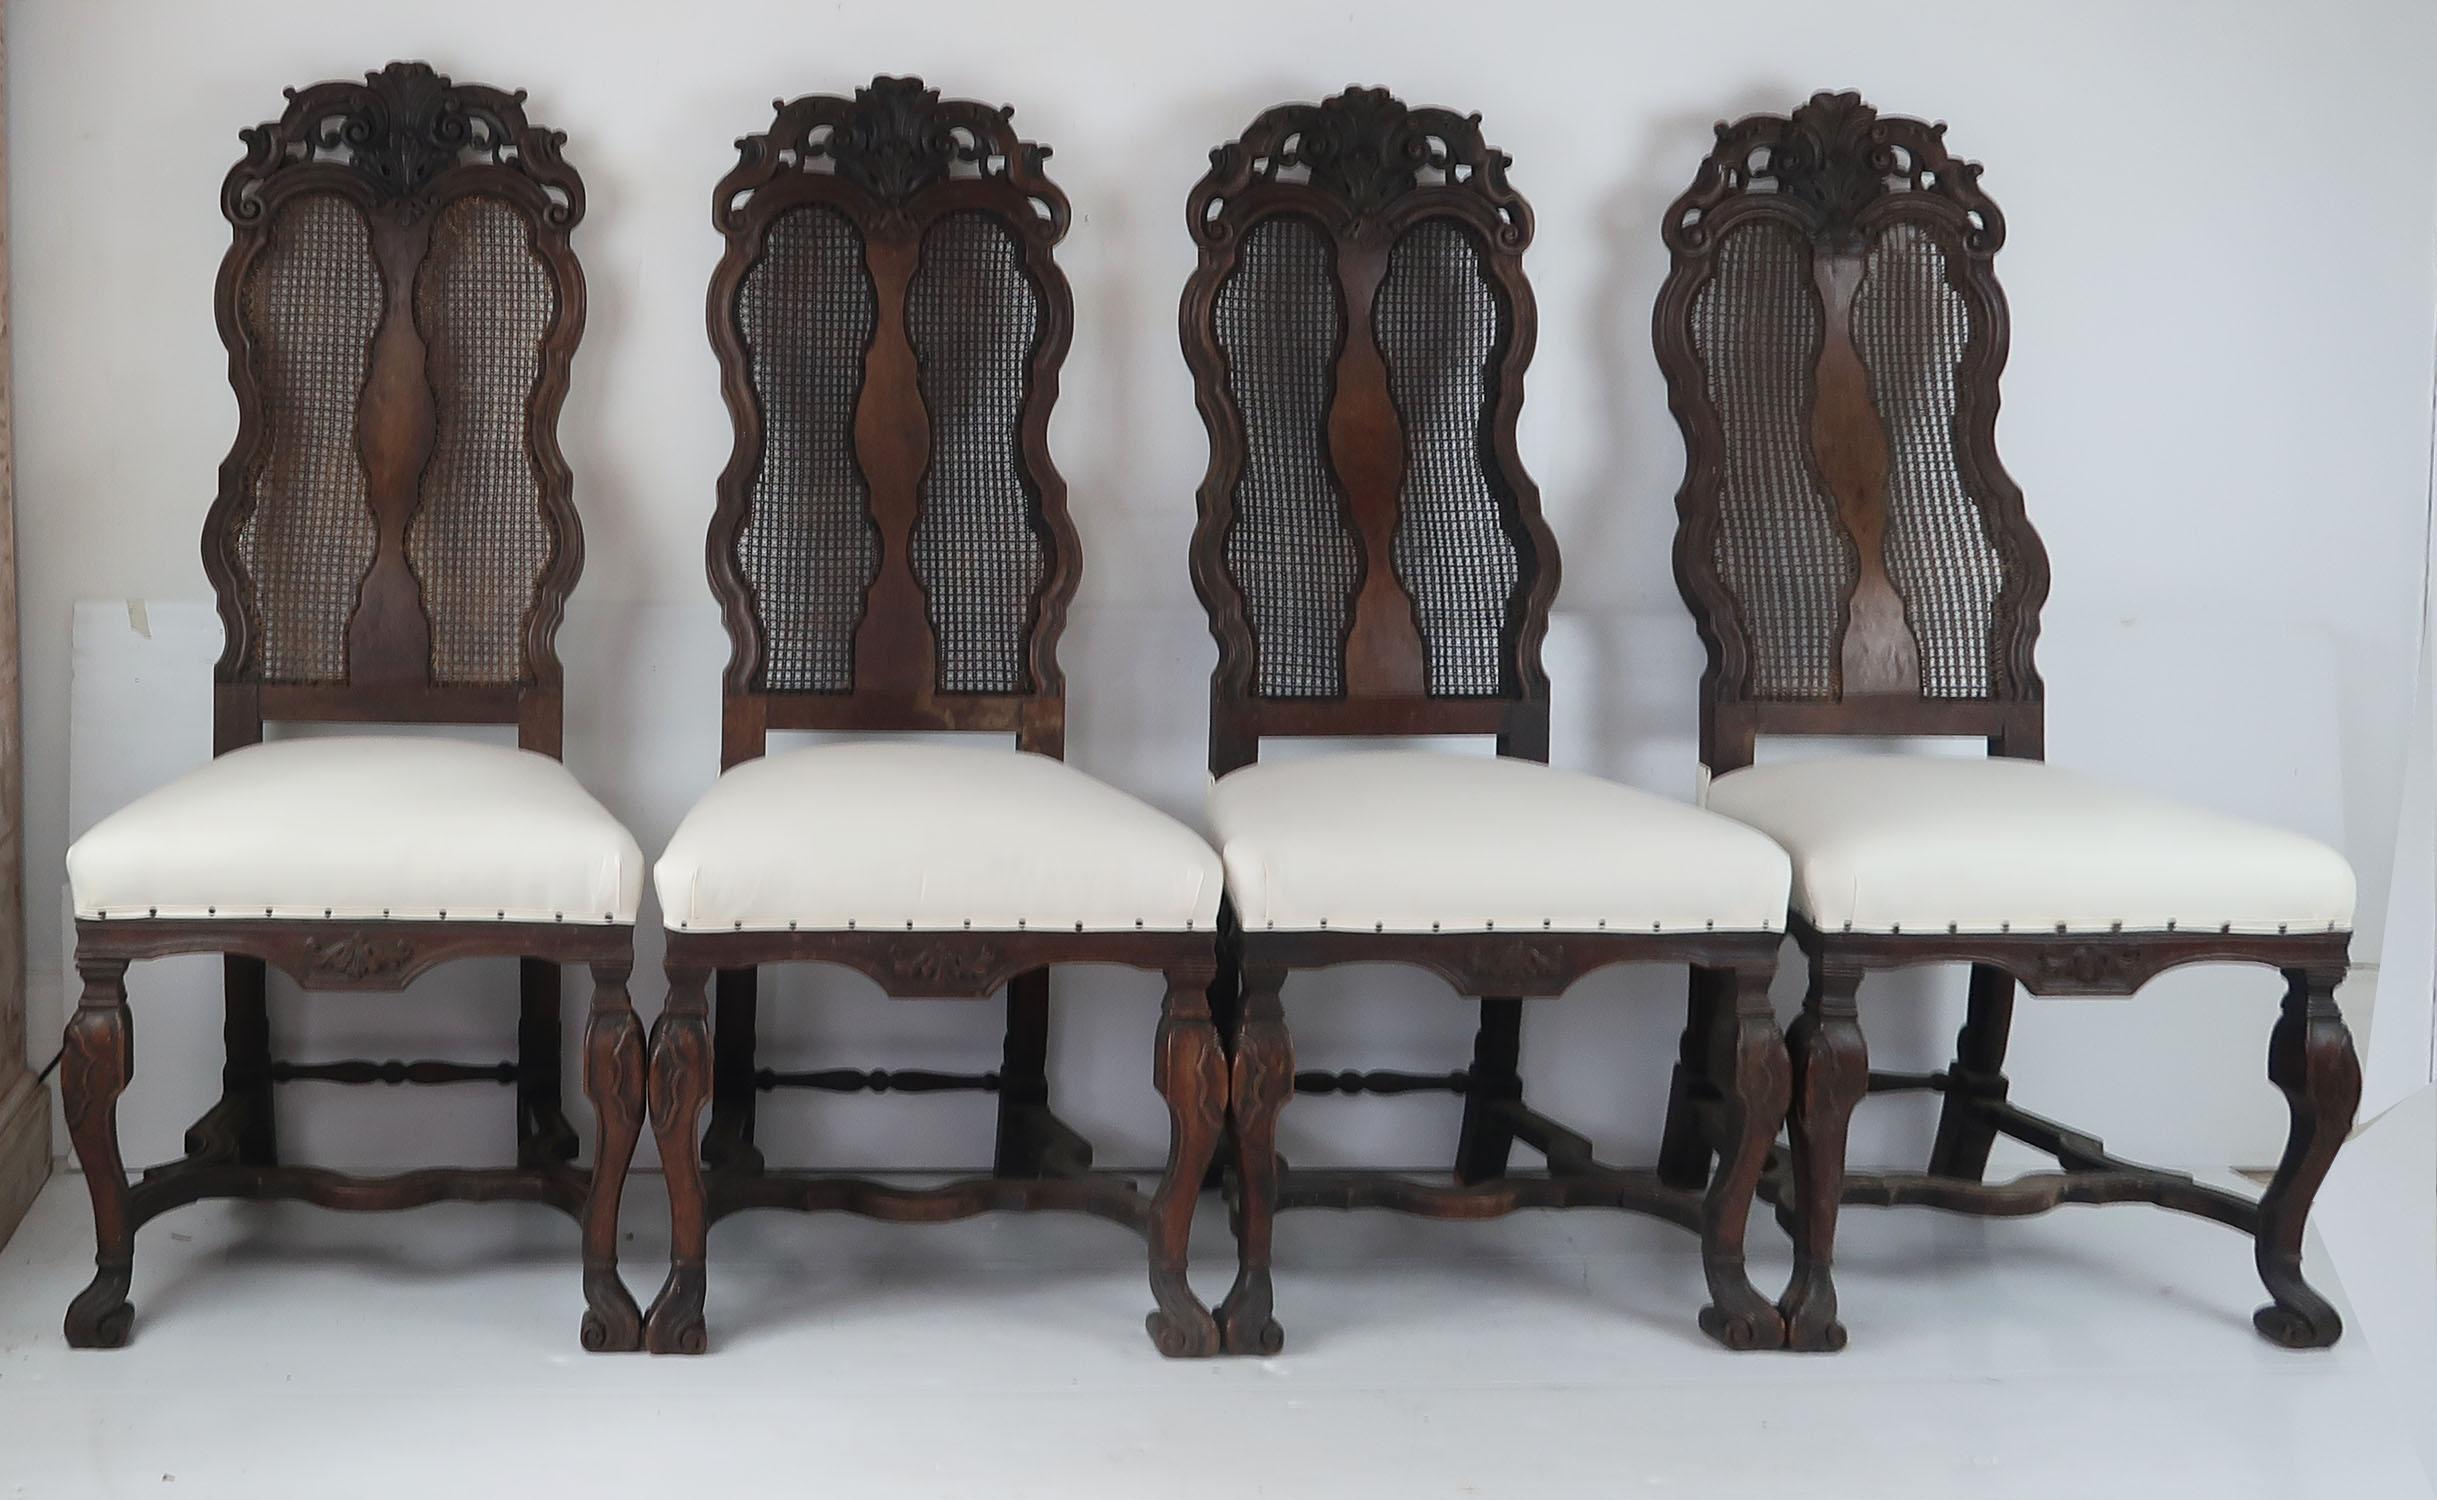 Sensational set of 4 carved walnut chairs.

Beautifully carved.

Newly upholstered in calico.

Lovely old patch repair to one of the backs of the top rail.

One of the side stretchers has been replaced.

There is some damage to a small area of